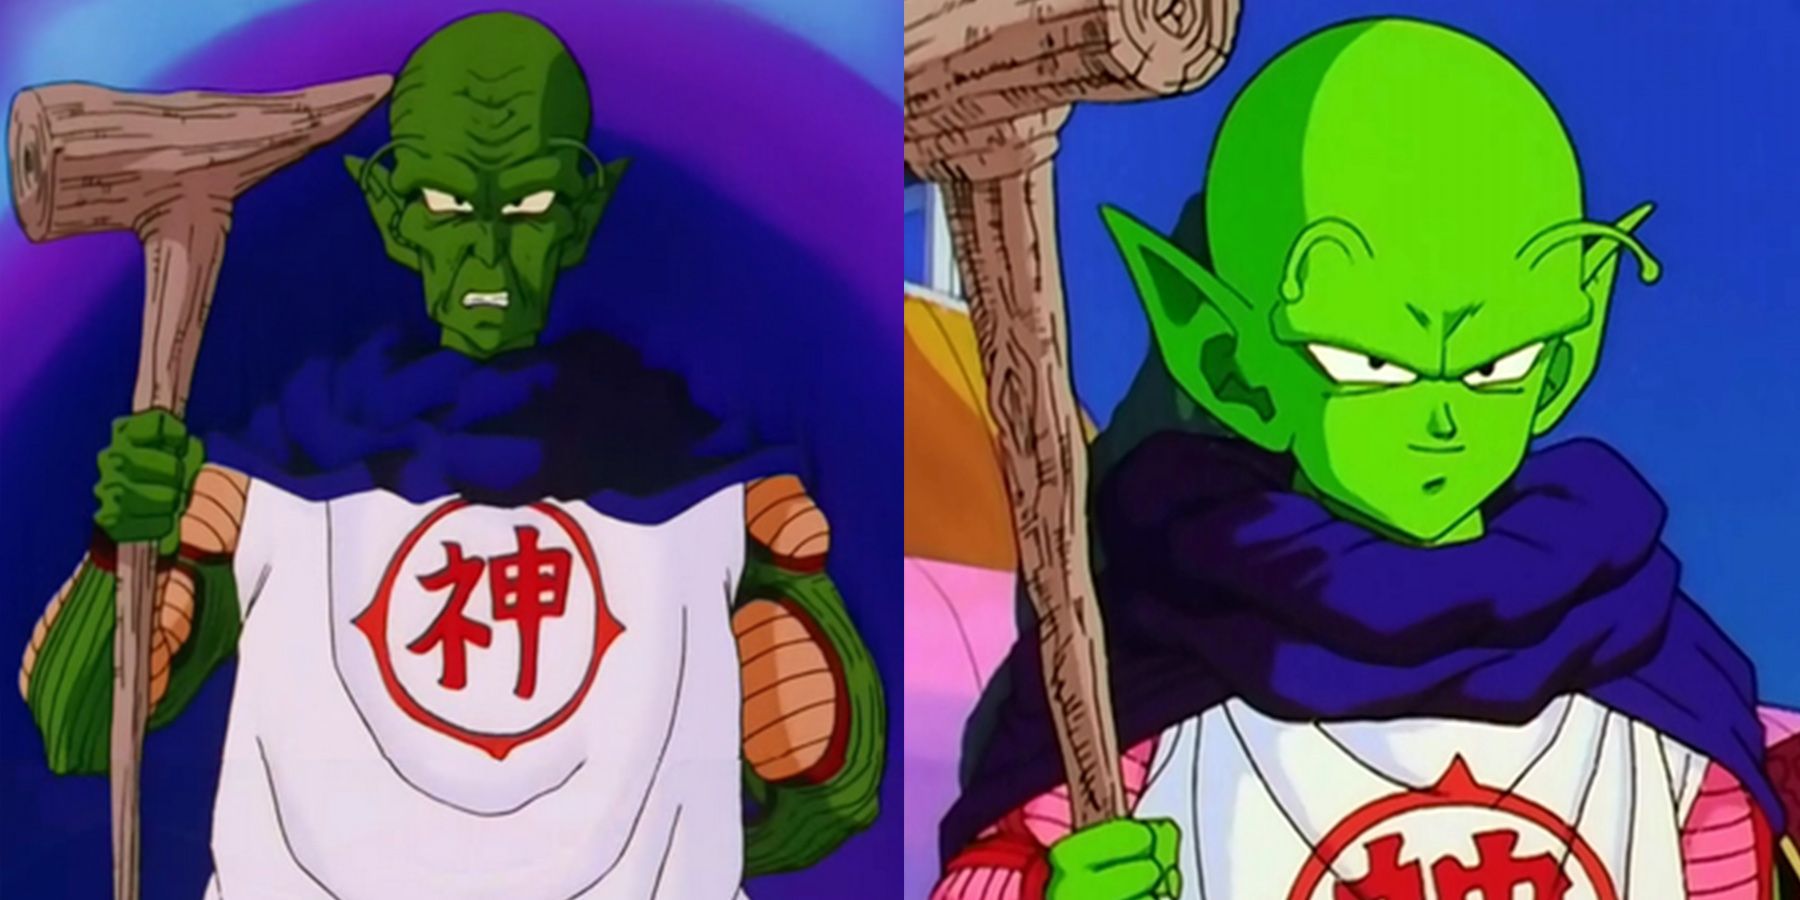 Kami and Dende dressed as the Guardian of Earth